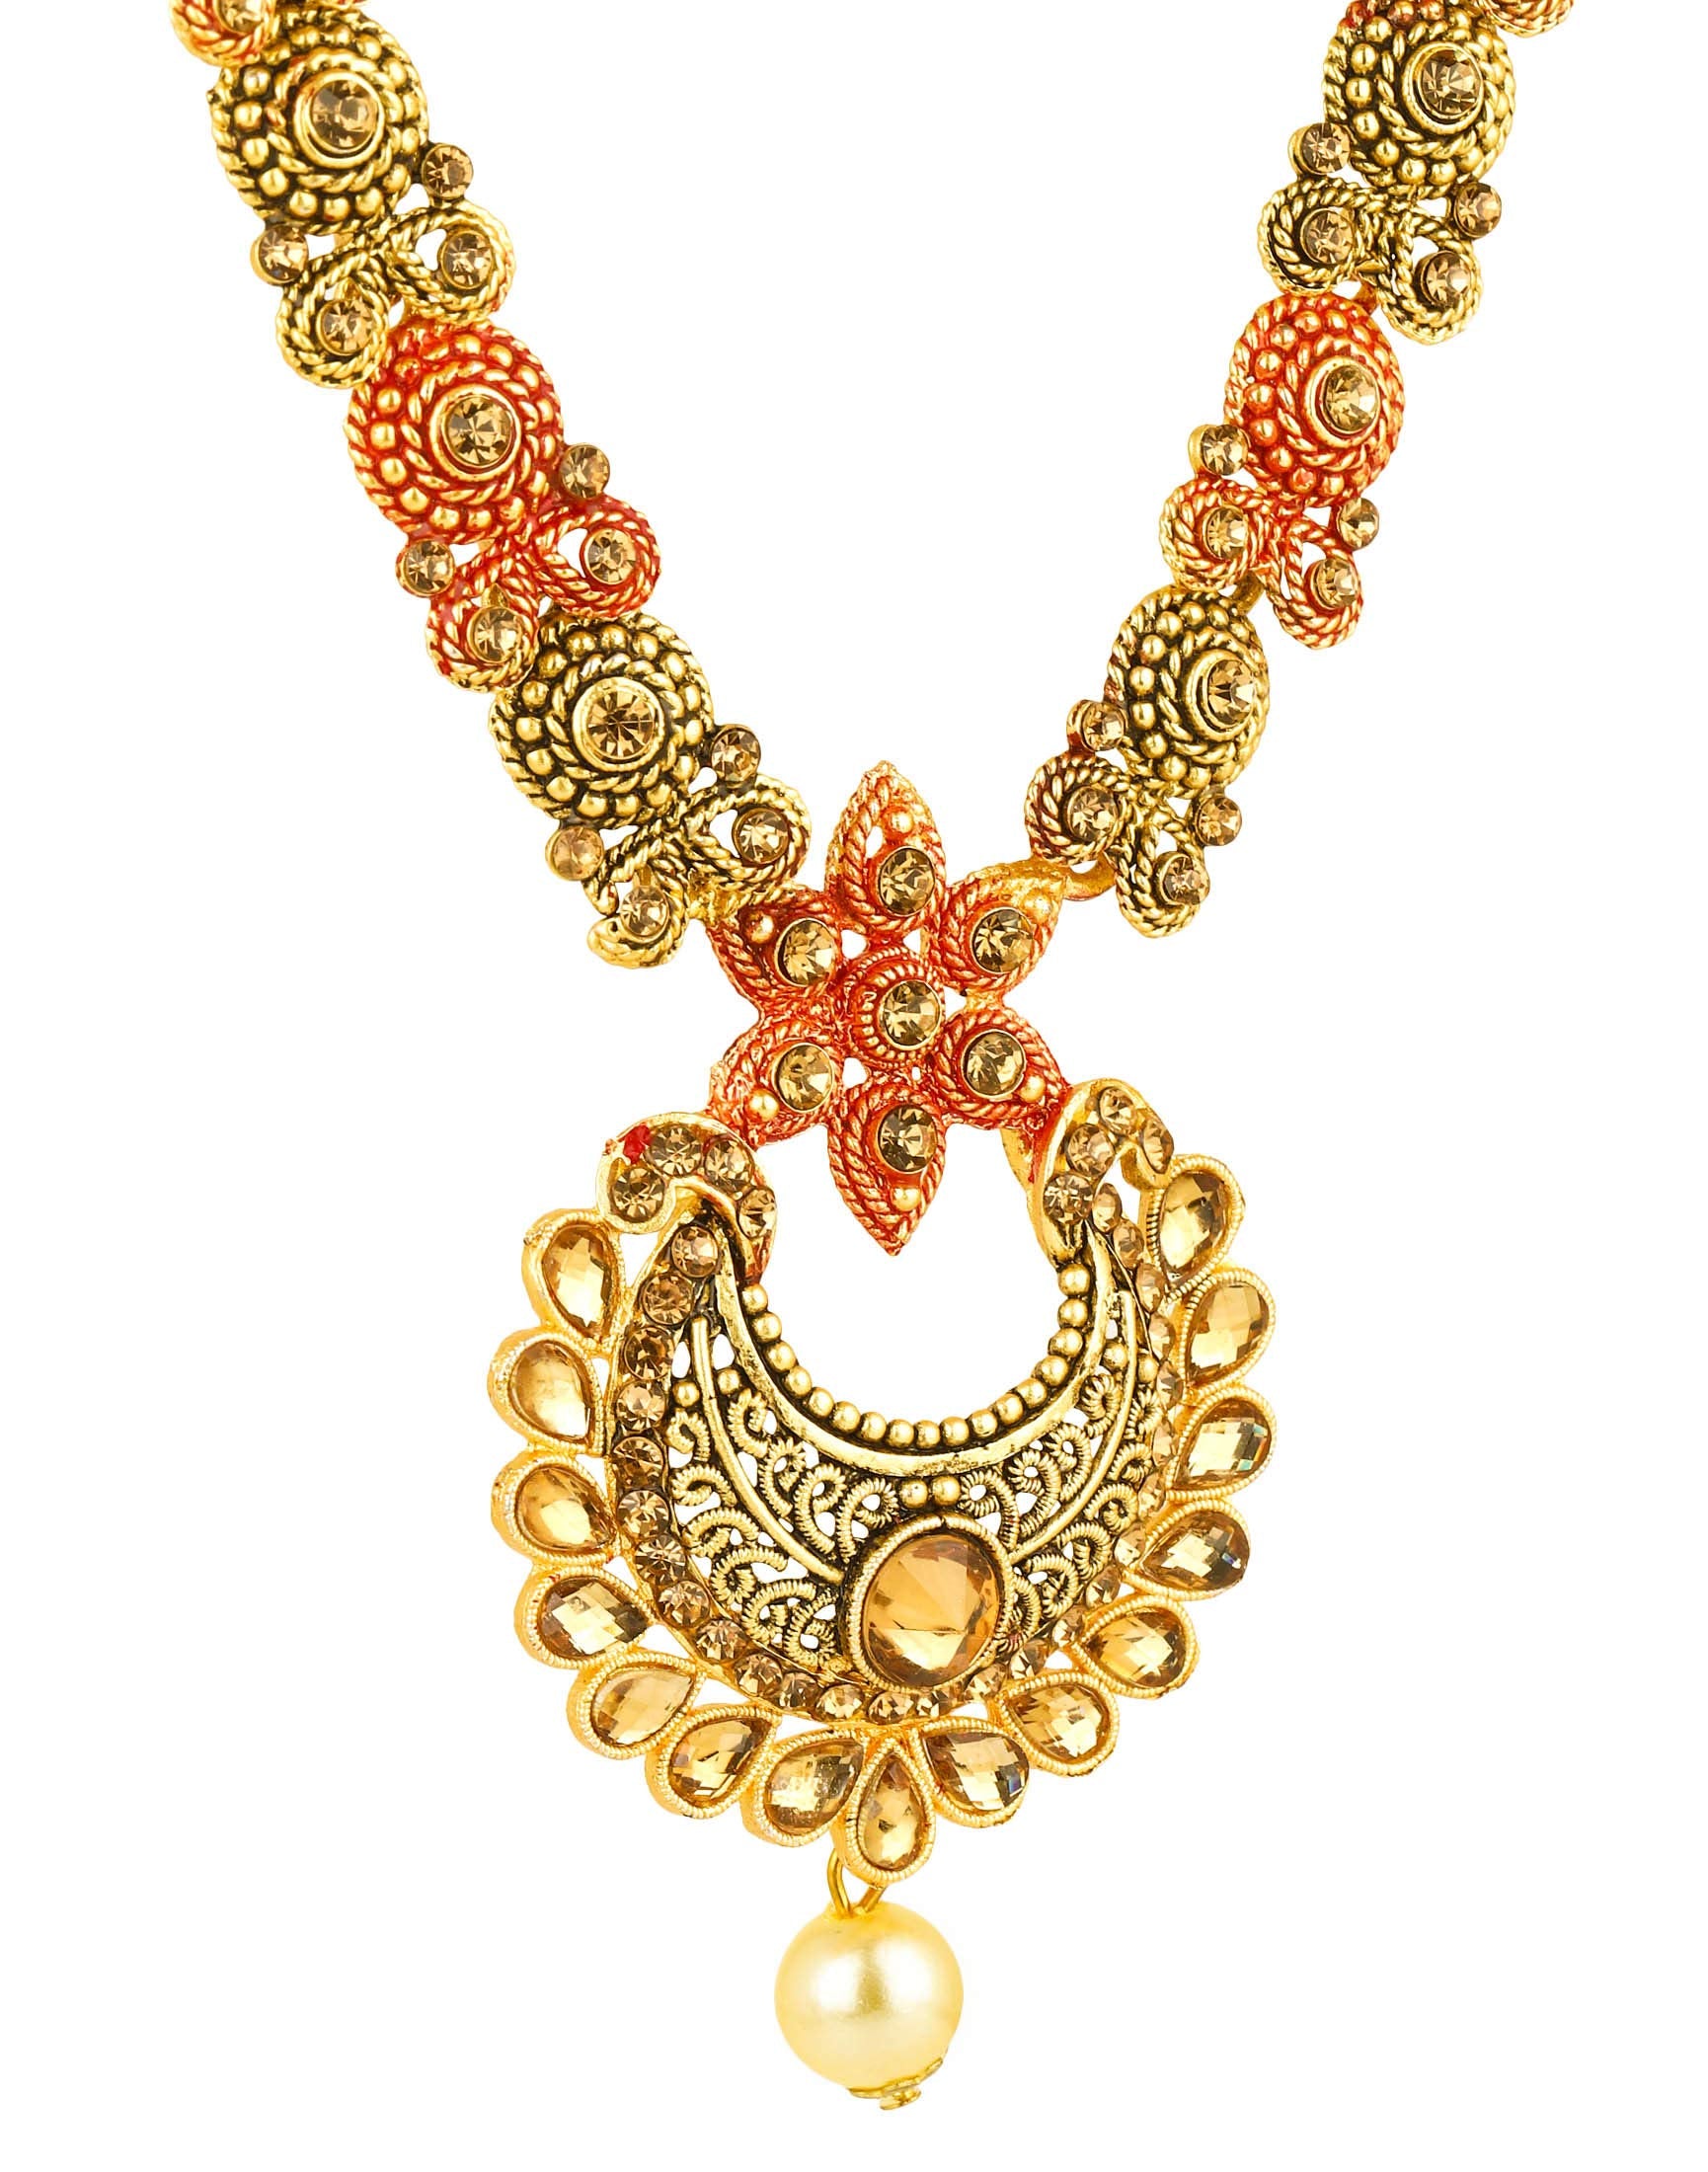 Yellow Chimes Exquisite Kundan Studded Meenakari Work Gold Plated Jewellery Necklace Set for Women and Girls